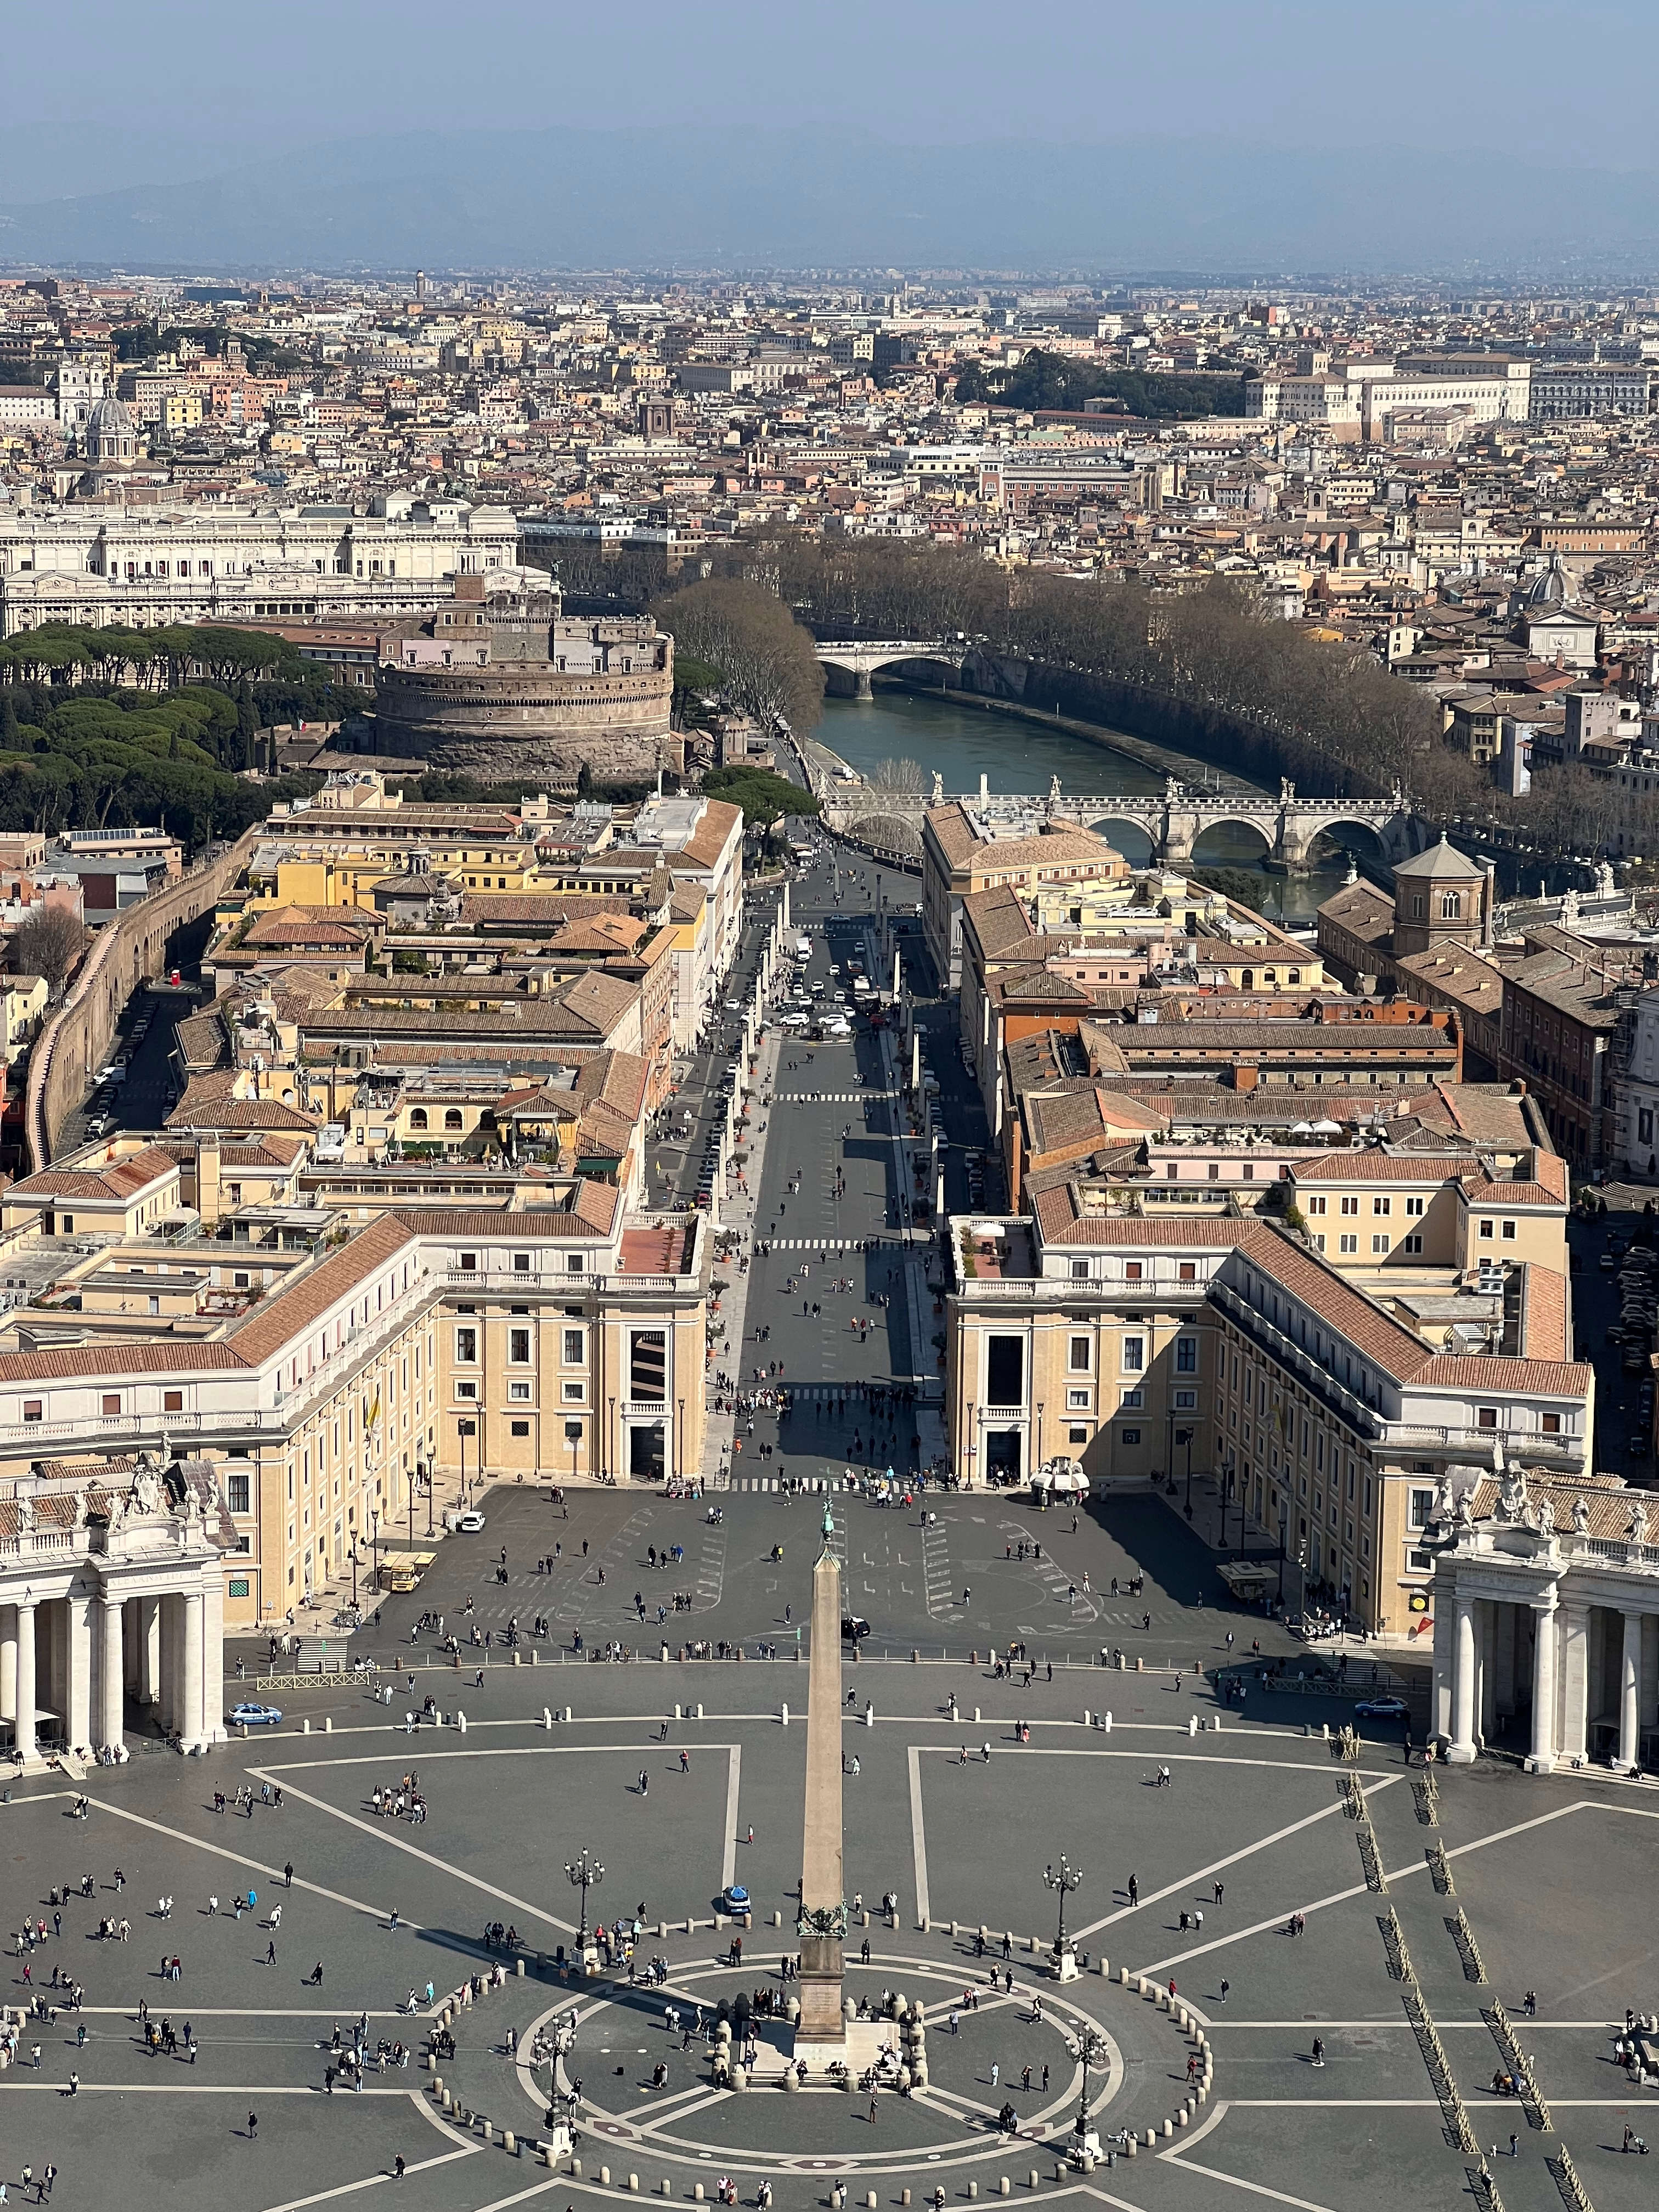 View of St Peter's Square from the dome of St Peter's Basilica